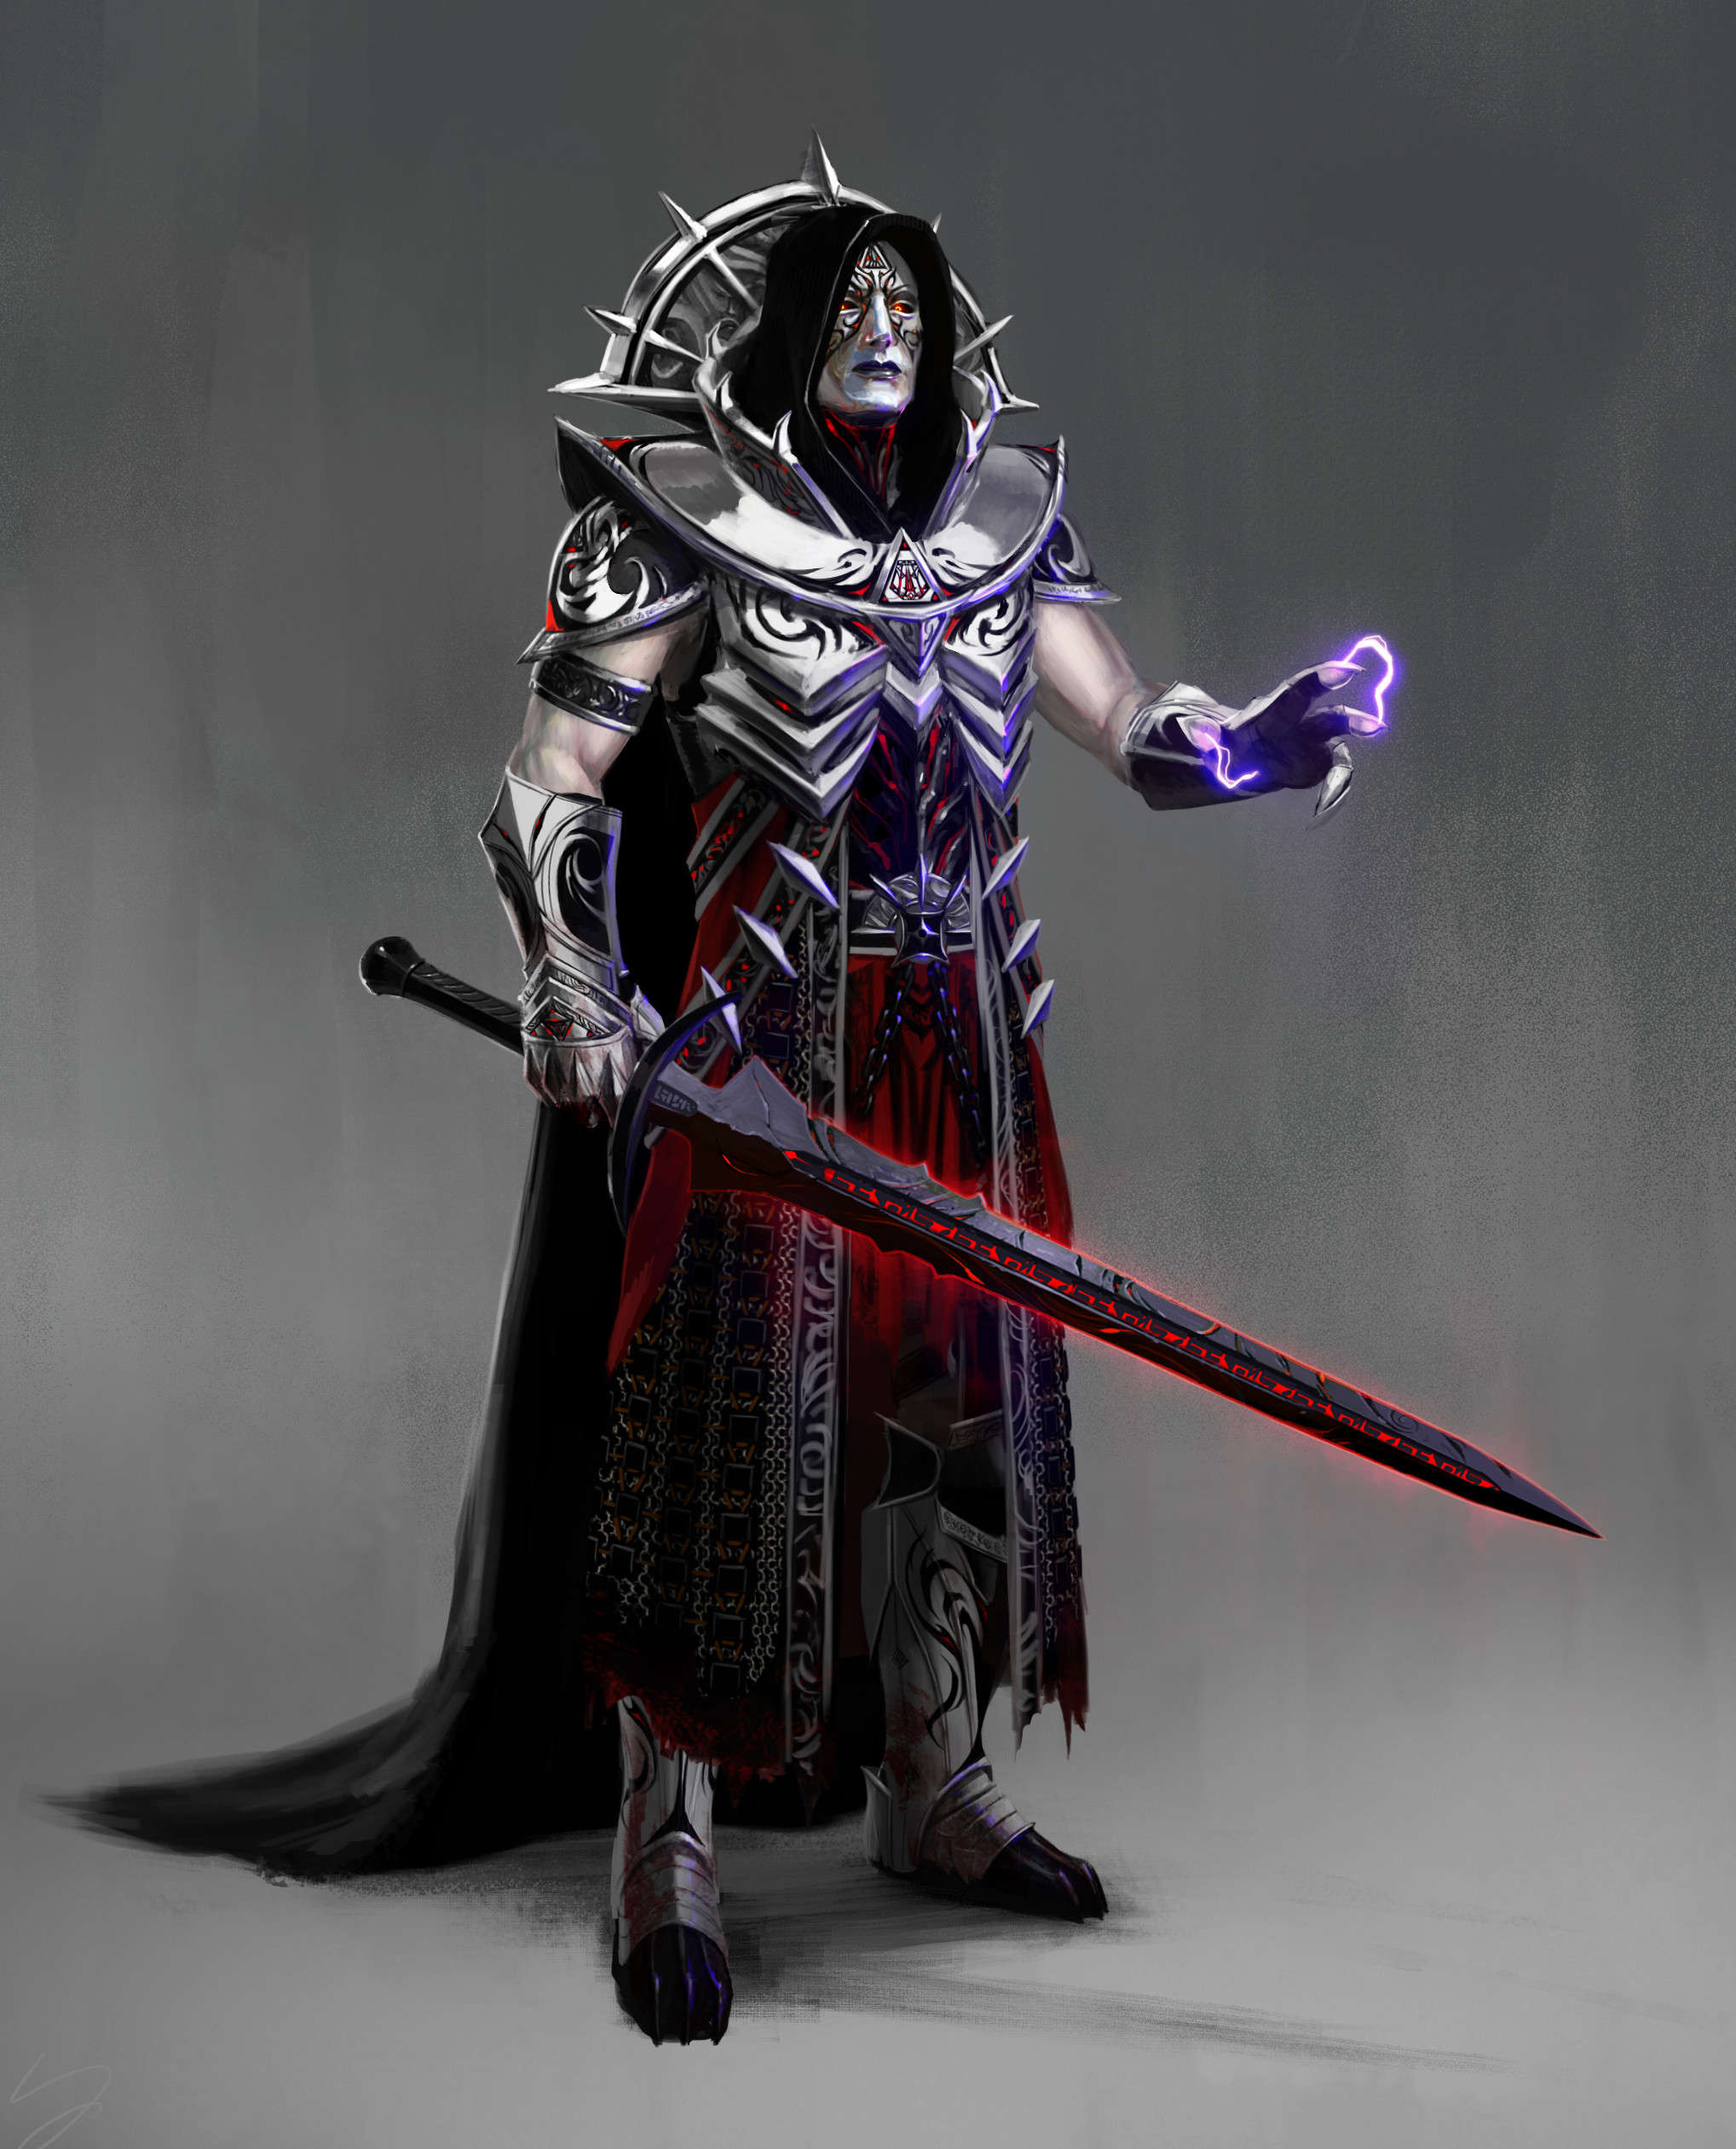 A decorative armor design of a Sith lord of old with his war sword.  I was inspired by Kingdom of Heaven's King Baldwin and Venetian Carnival masks.  